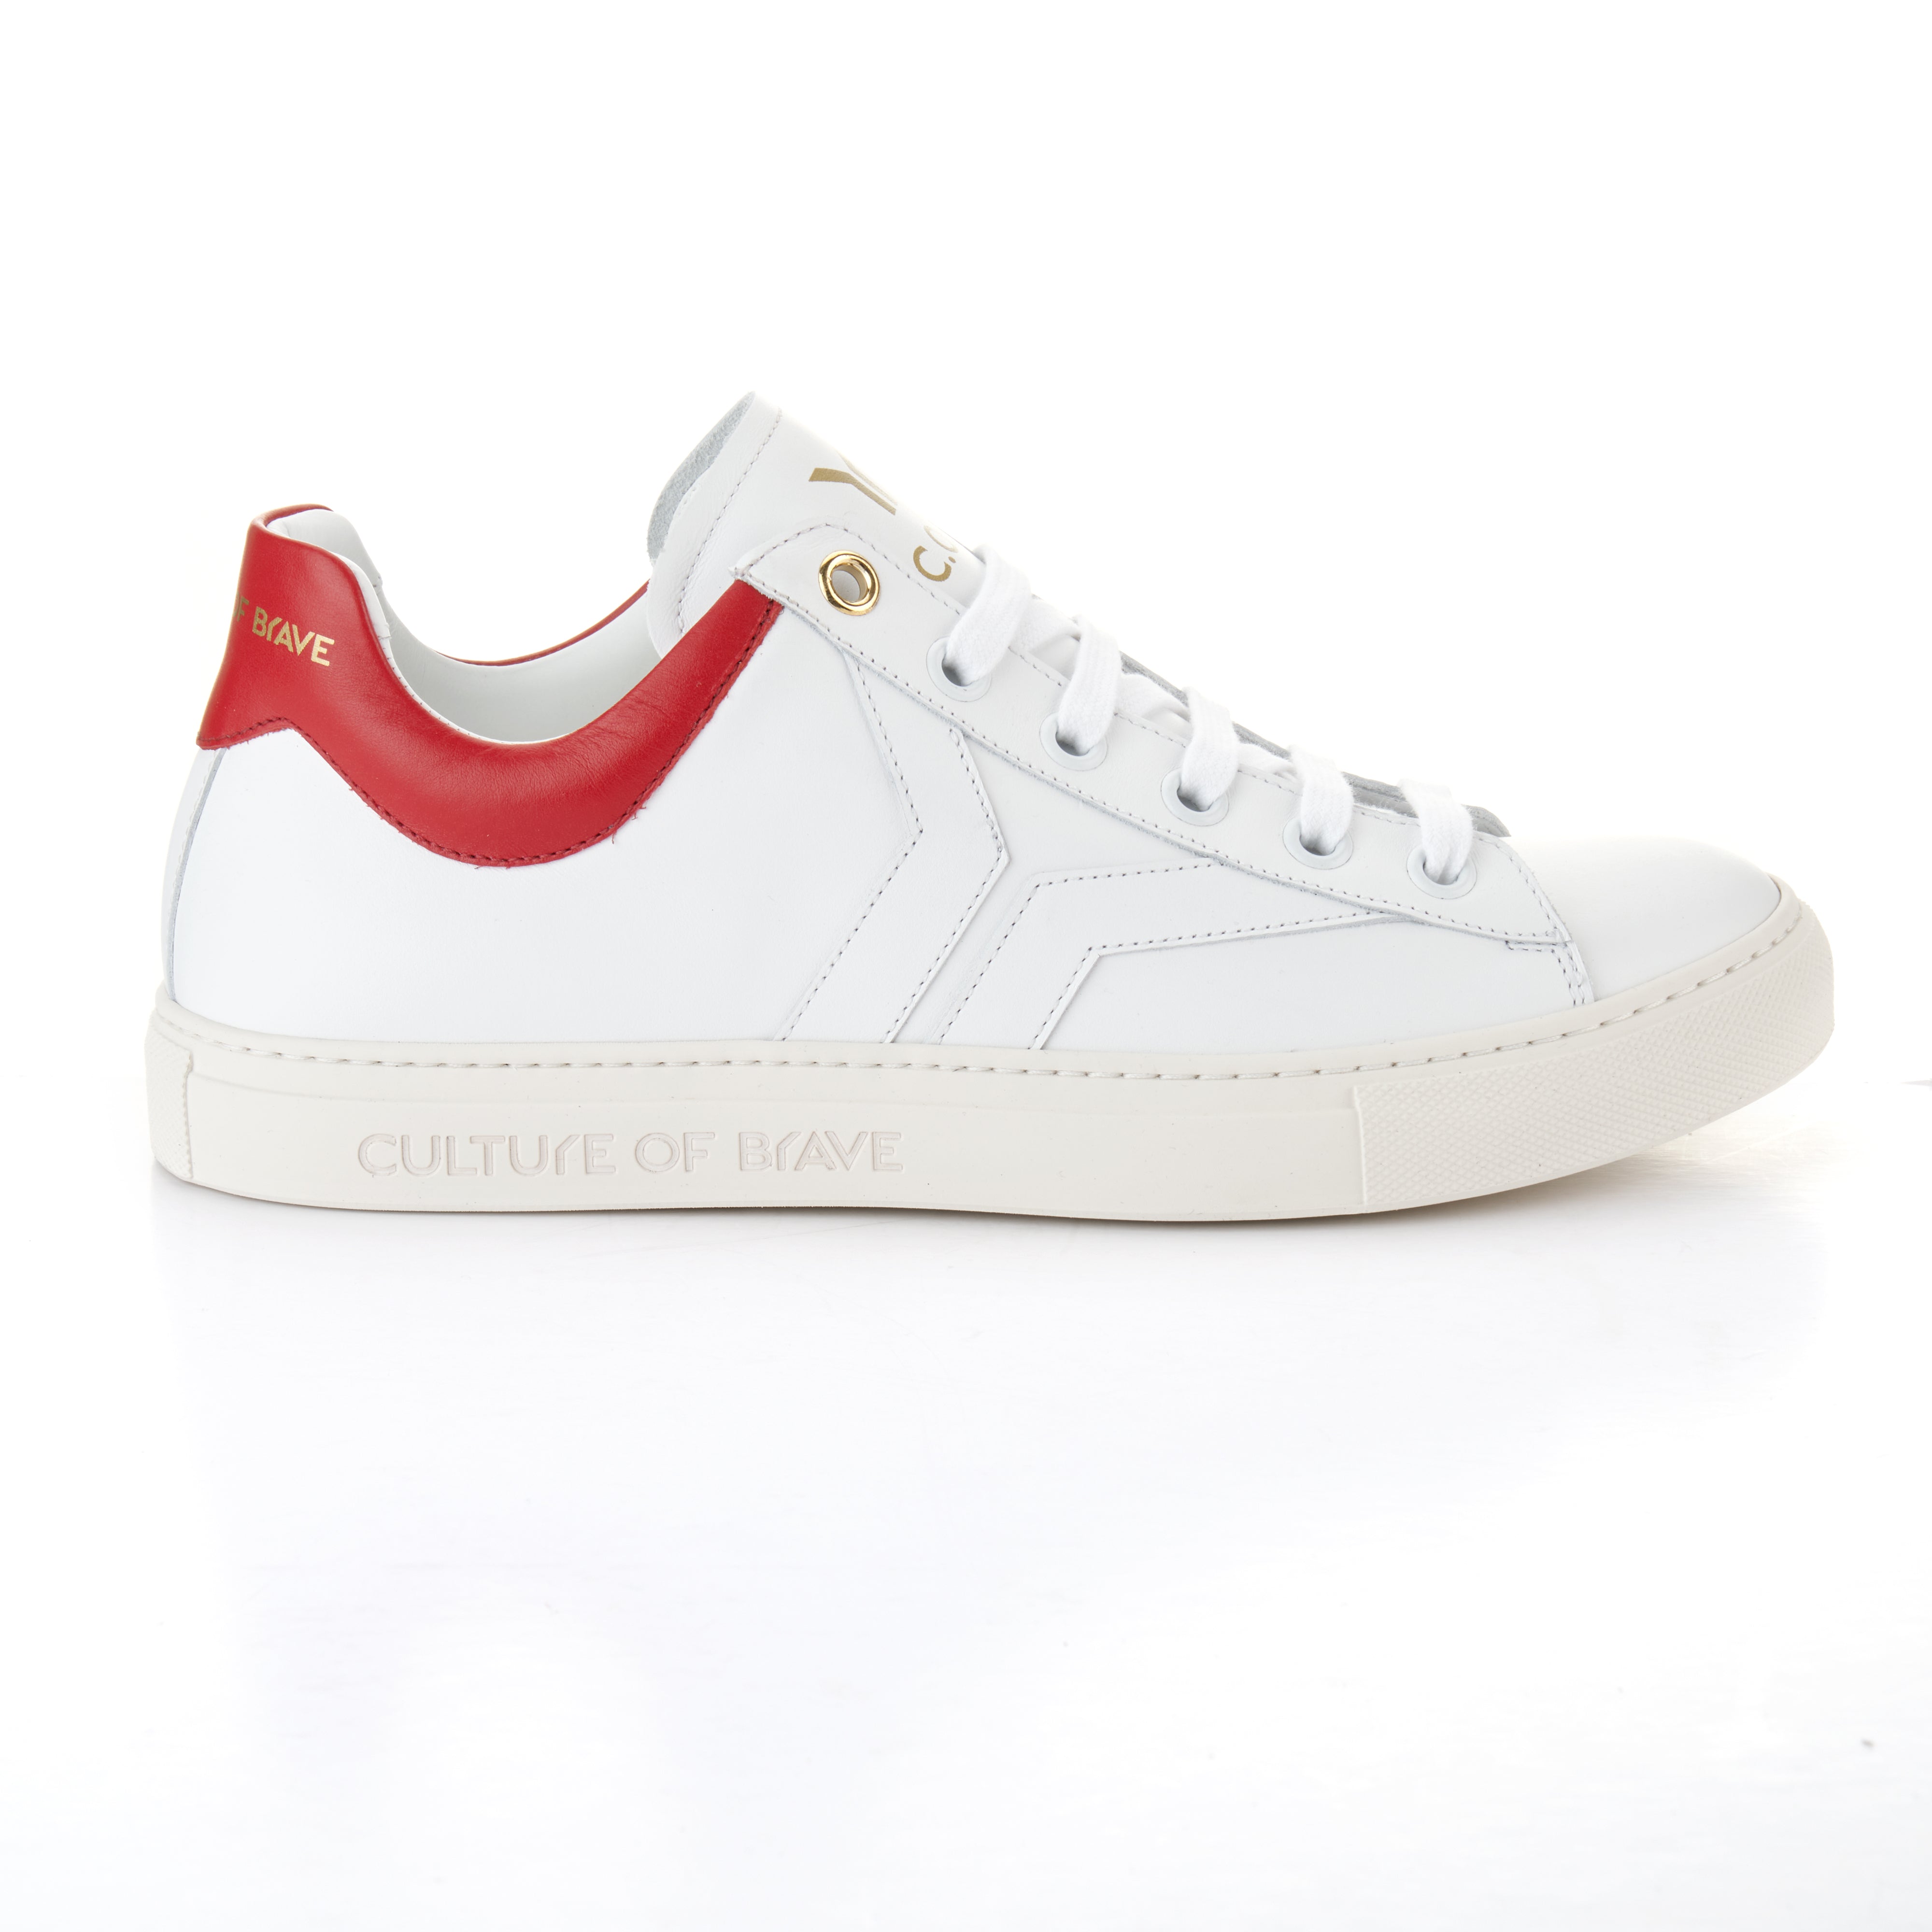 Courage S28 Men White leather red ankle low cut